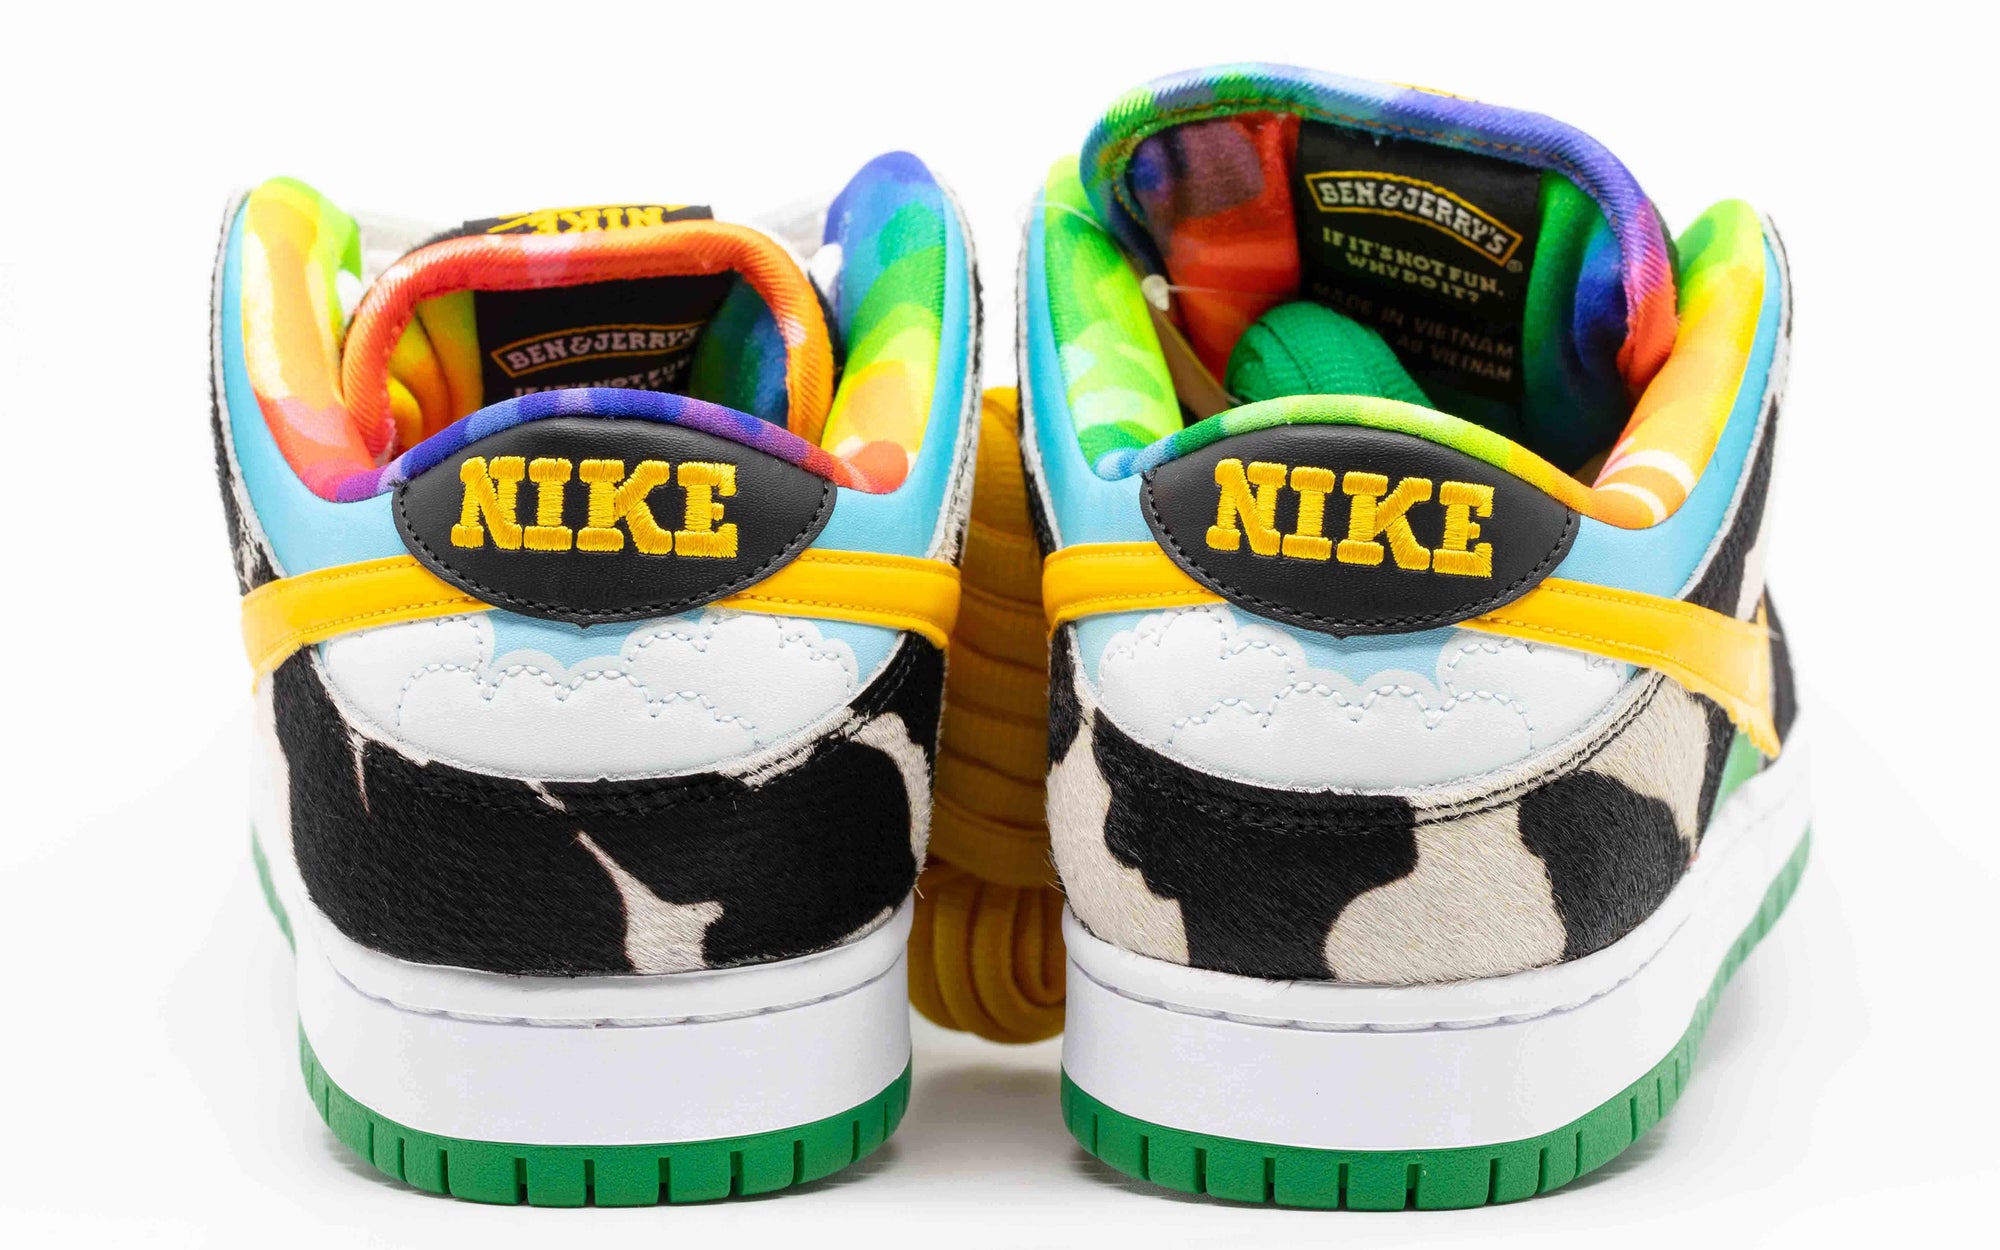 Nike SB Dunk Low "Ben & Jerry's Chunky Dunky" (2020)